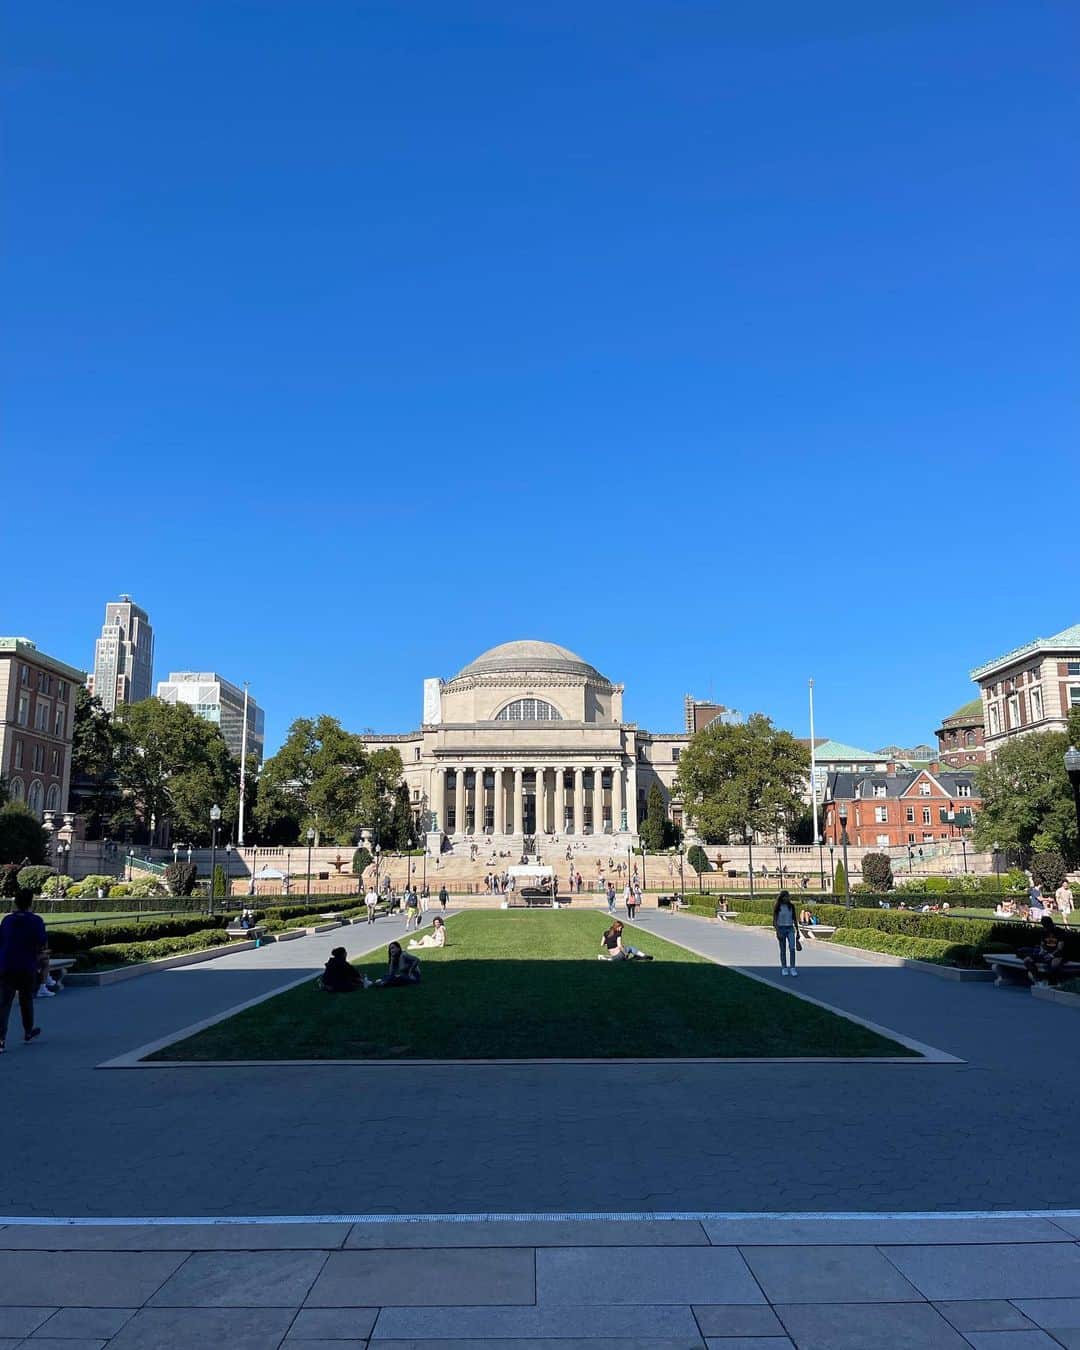 小林さやかのインスタグラム：「Teachers College, Columbia University に入学して早1か月が経とうとしています...!! 初めての留学で初めてのセメスターなので覚悟はしていましたが、やはり誰よりも英語ができない世界線がそこには広がっておりました。授業では一人だけ特別に録音させてもらい、クラスメイトが2時間で読める論文をわたしは2日かけて必死で読む毎日ですが、それなりに楽しんでおります。ほんとです。  ここにいられることだけで感動できるというのは、本当にありがたい経験だなぁと、たまに本当に胸に詰まるような想いでいっぱいになります。引き続きここで踏ん張ります！🏋️‍♀️  It has been almost one month since I enrolled at Teachers College, Columbia University...! This is my first time to study abroad and my first semester, so I was quite prepared for it, but I knew that I've never met someone whose English is worse than me. I'm the only person who was allowed to record classes (due to my poor listening skill) and I spend two days frantically reading papers that my classmates can read in two hours, but I am enjoying it.  It is a very gratifying experience for me to be able to be here and be moved just by it. I'll continue to hang in here! 🏋️  #columbiauniversity  #teacherscollege  #newyork  #studyabroad」